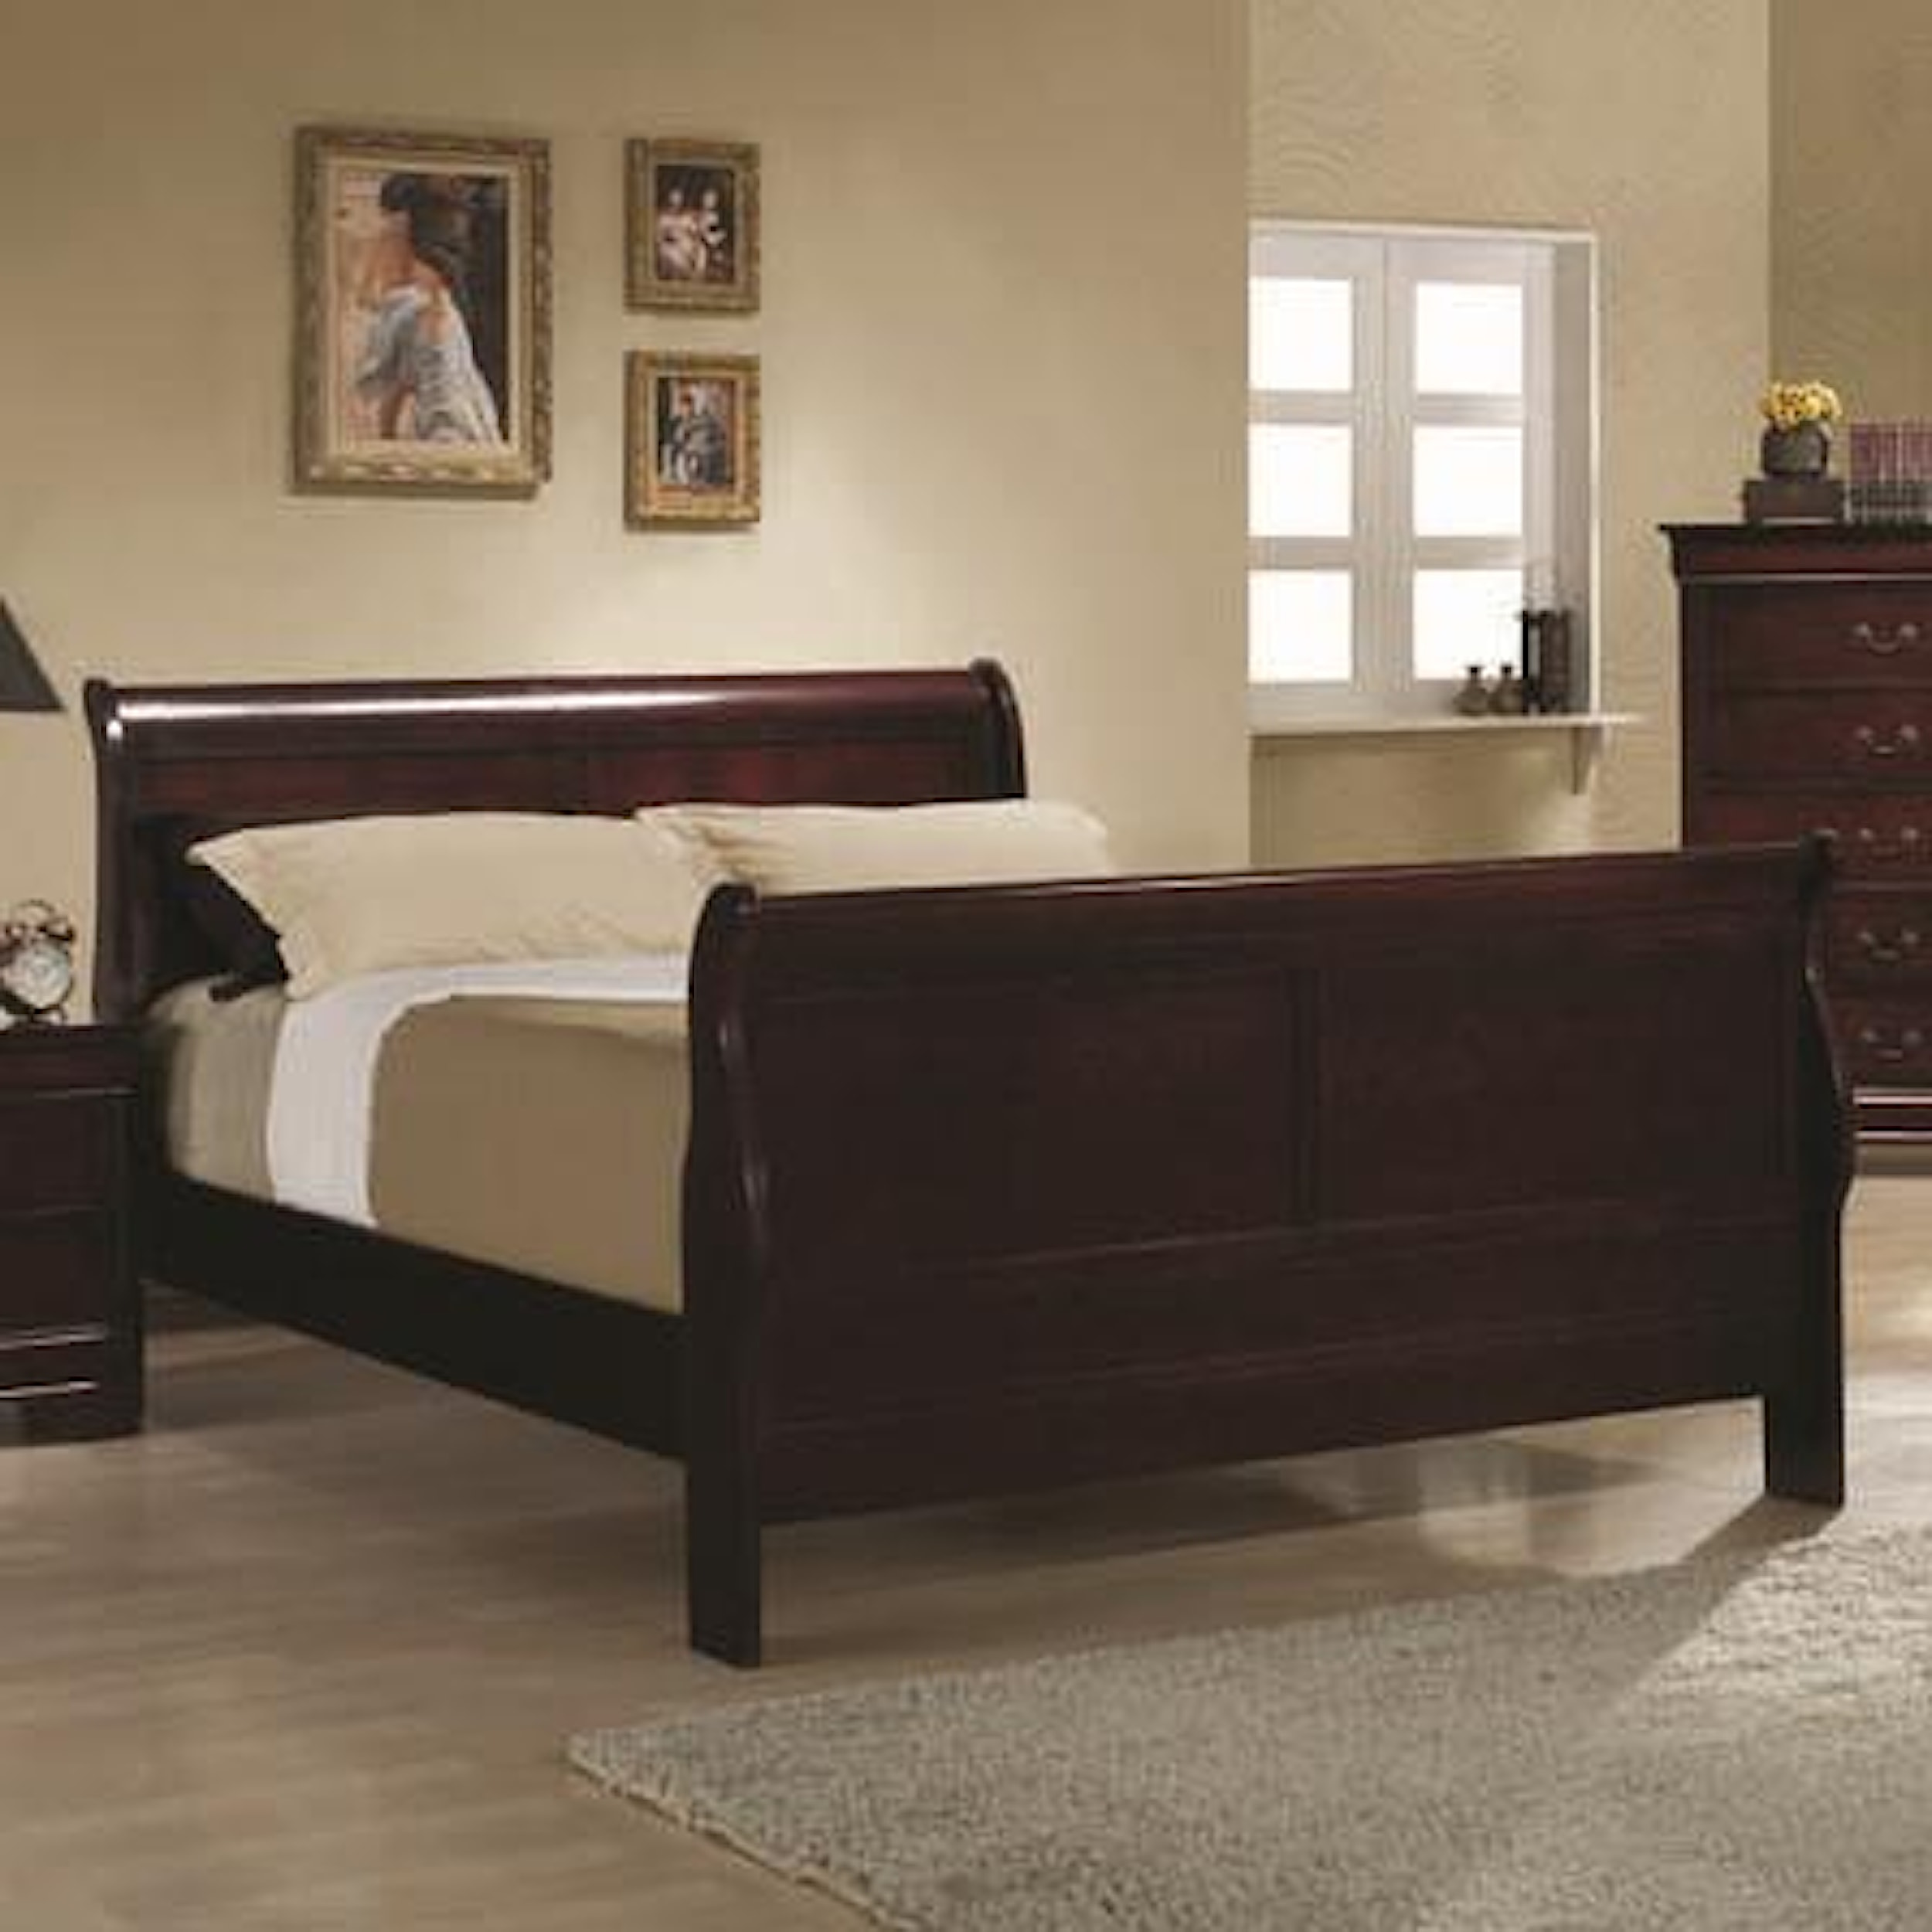 203975 Coaster Furniture Louis Philippe - Cherry Chest